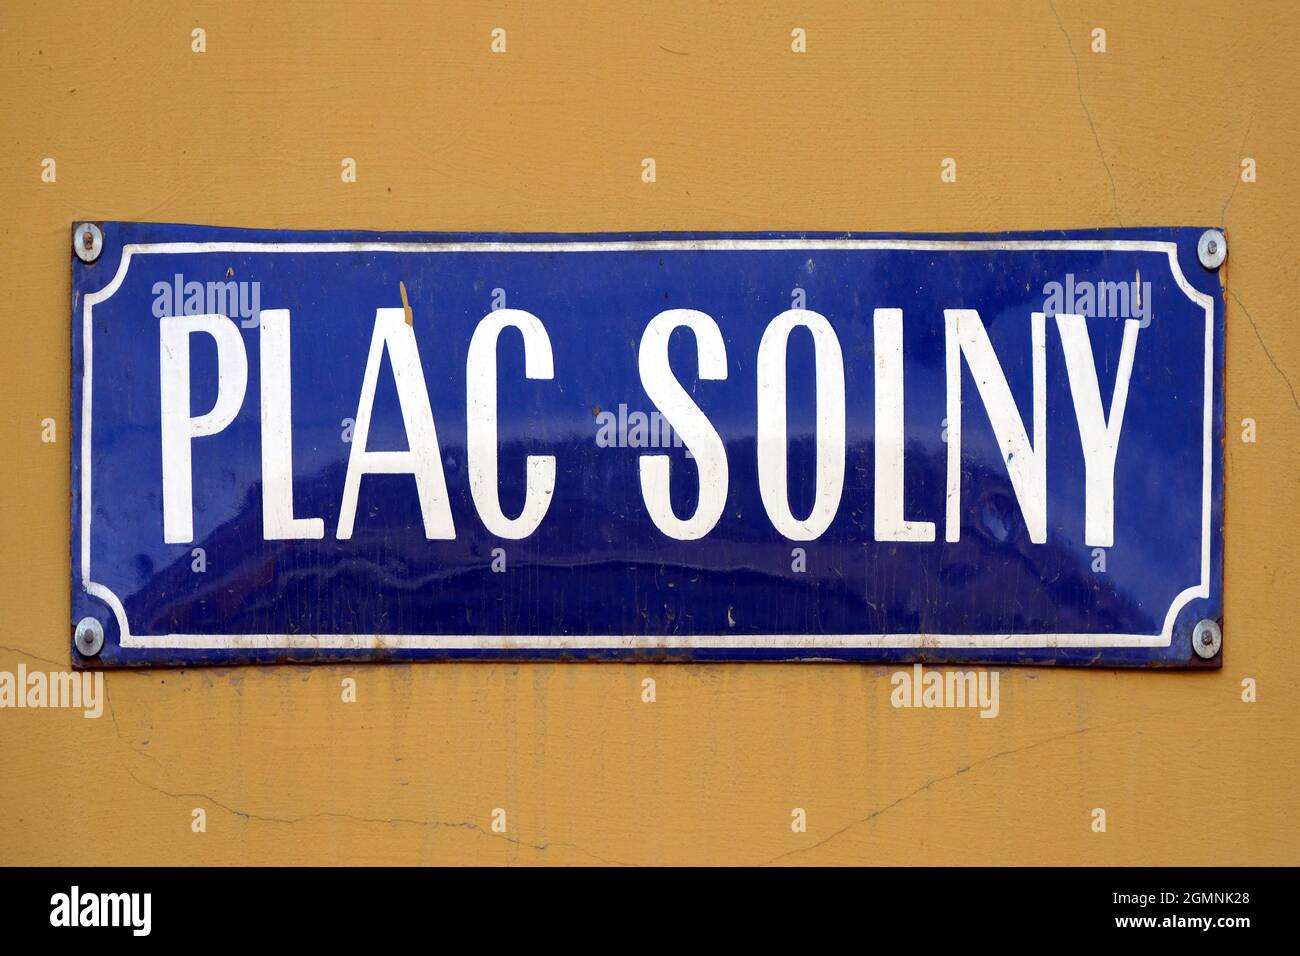 Street sign of Salt Market Square Plac Solny in the Old Town of Wroclaw - Poland. Stock Photo